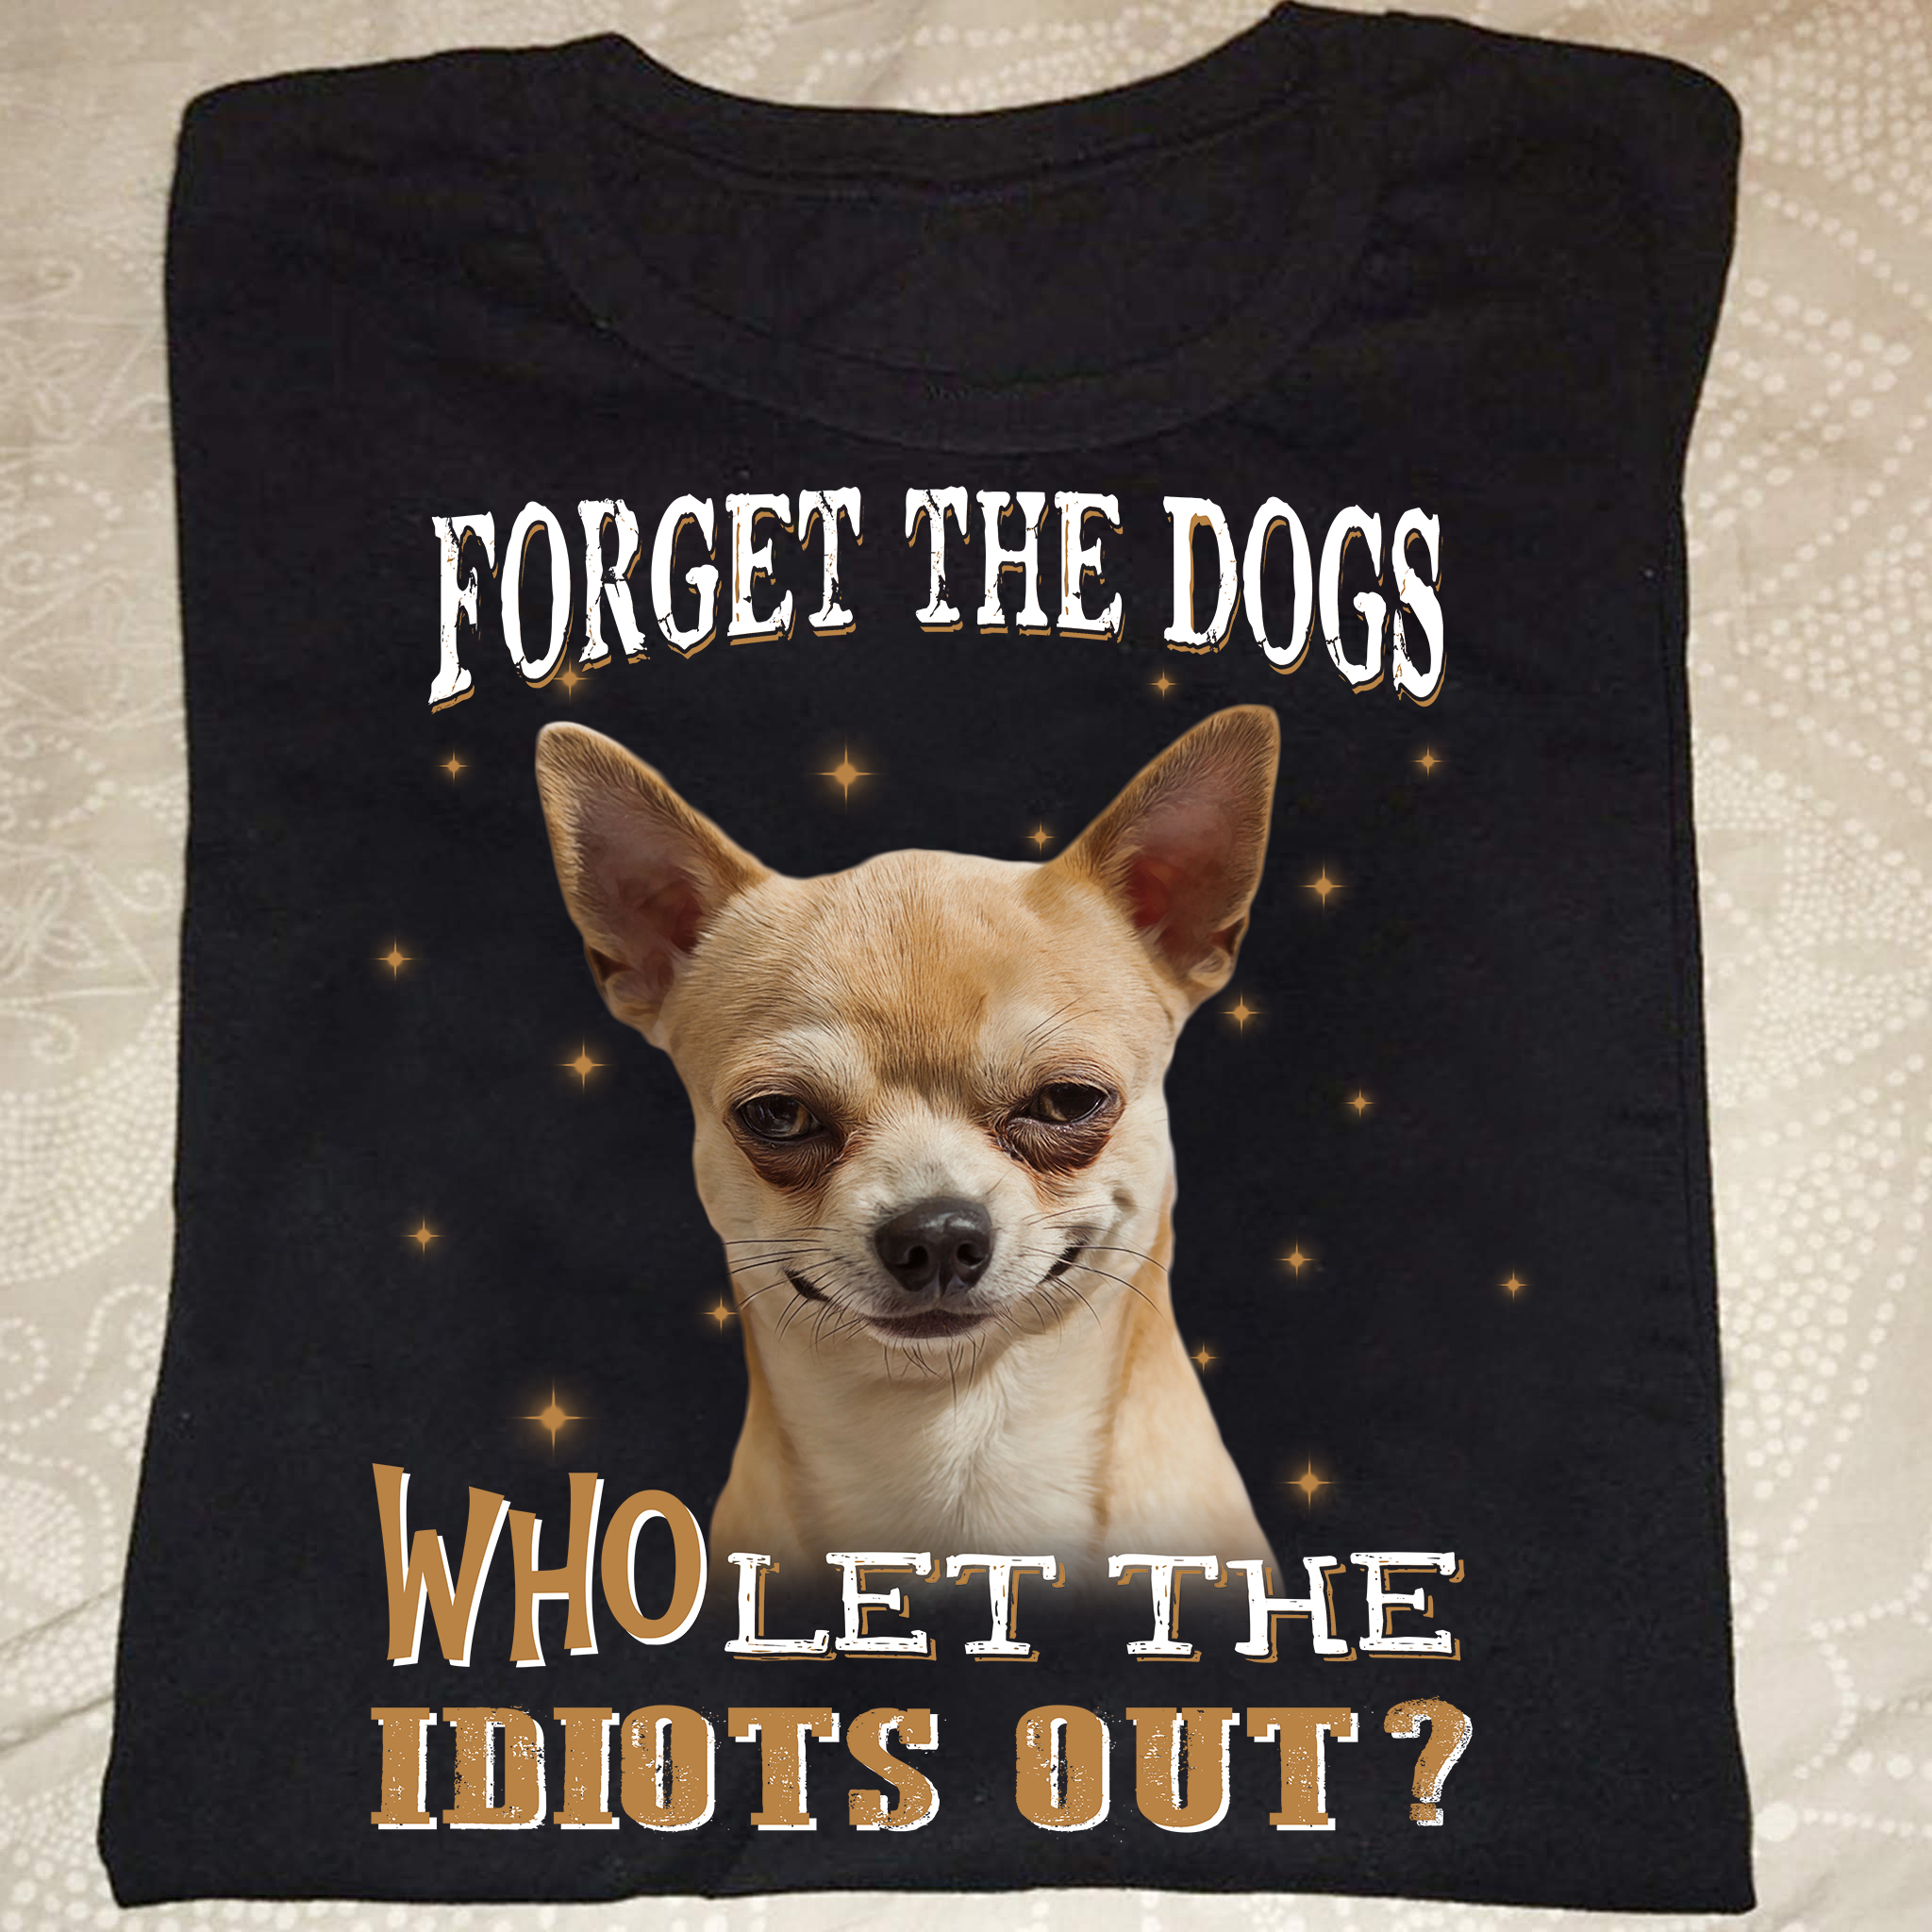 Forget the dogs who let the idiots out - Grumpy chihuahua dog